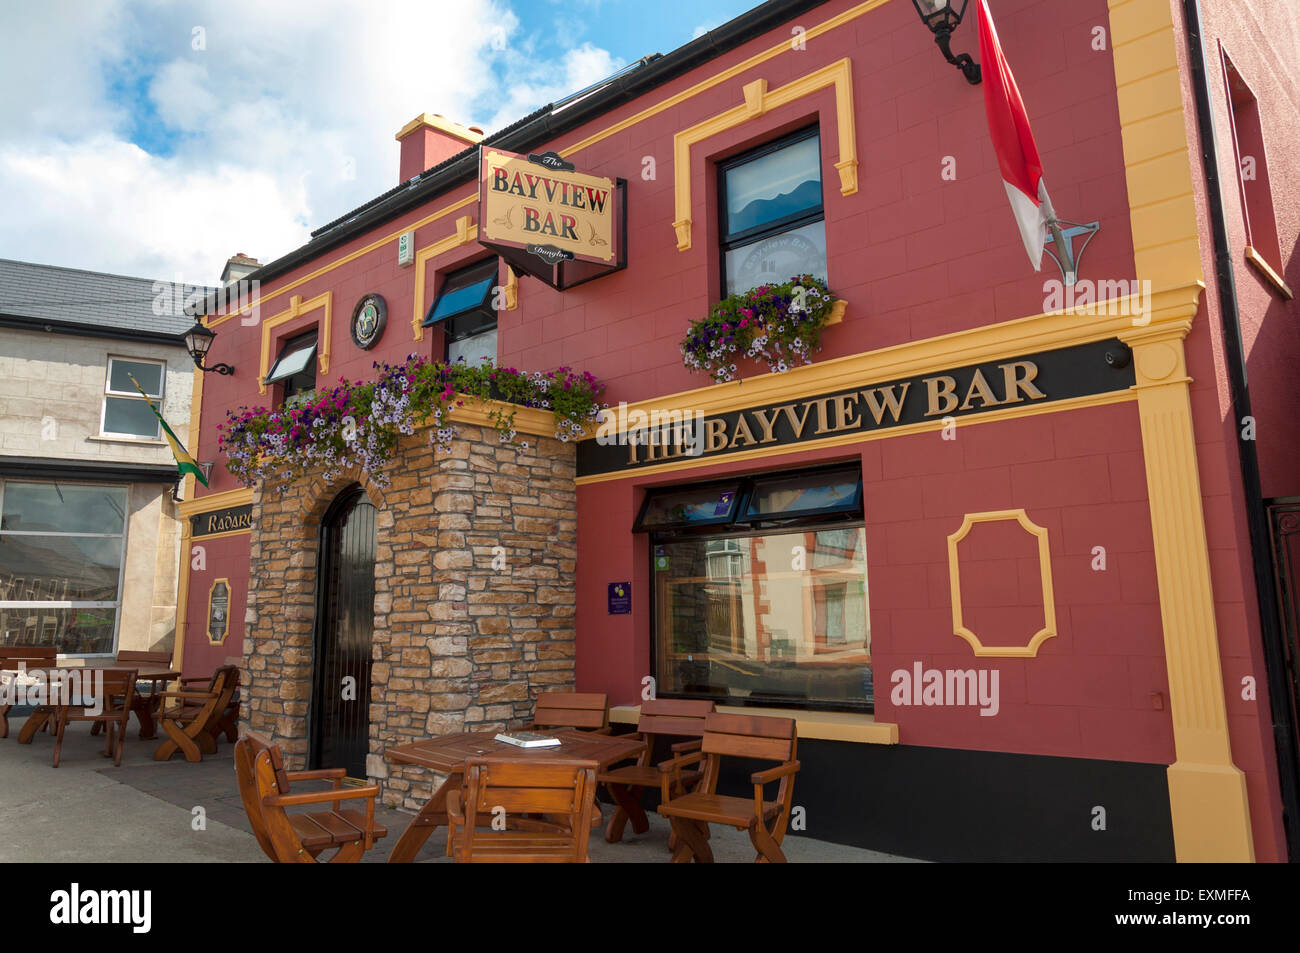 Bayview Bar in An Clochán Liath, Dungloe or Dunglow, is a Gaeltacht town in County Donegal, Ireland. Stock Photo